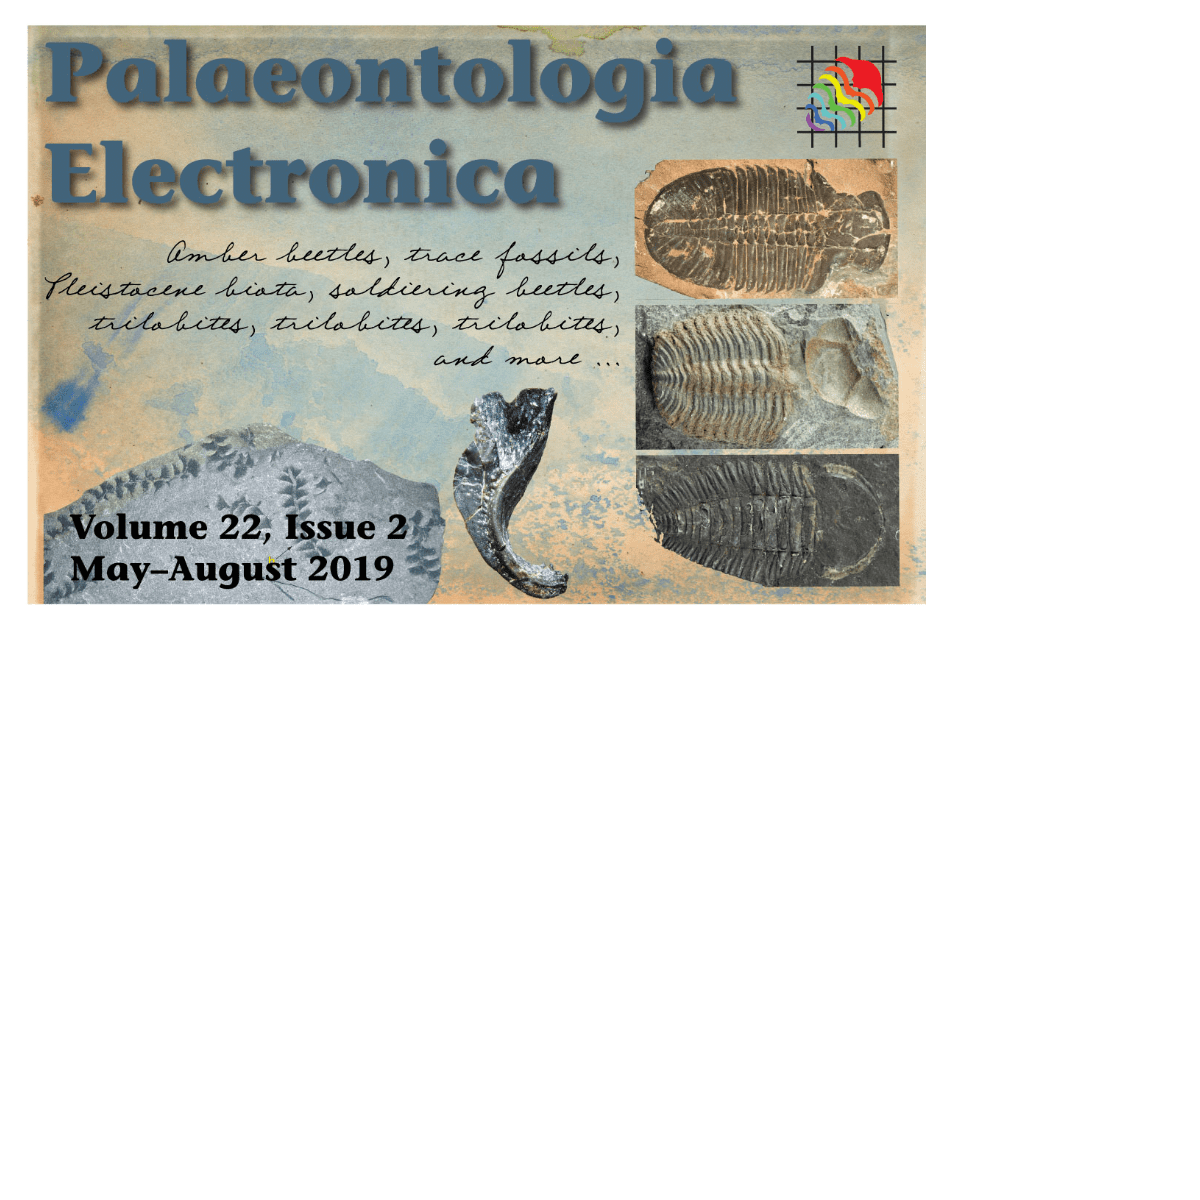 Palaeontologia Electronica Volume 22, Issue 2 May-August 2019